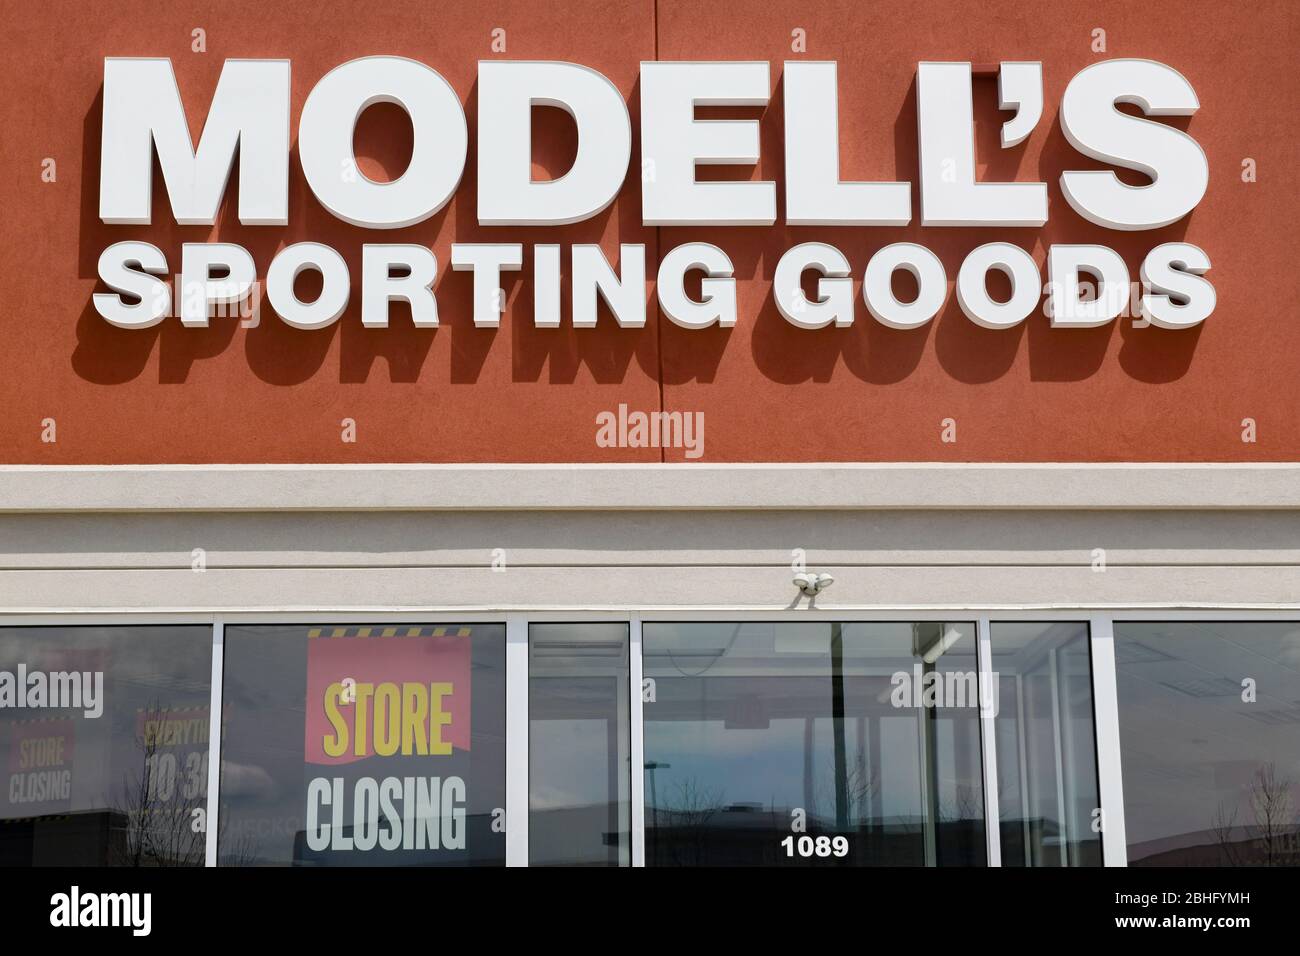 Modells stores in danger of going out of business - Retailer close to bankruptcy or bankrupt - businesses harmed by Covid-19 depression / recession Stock Photo